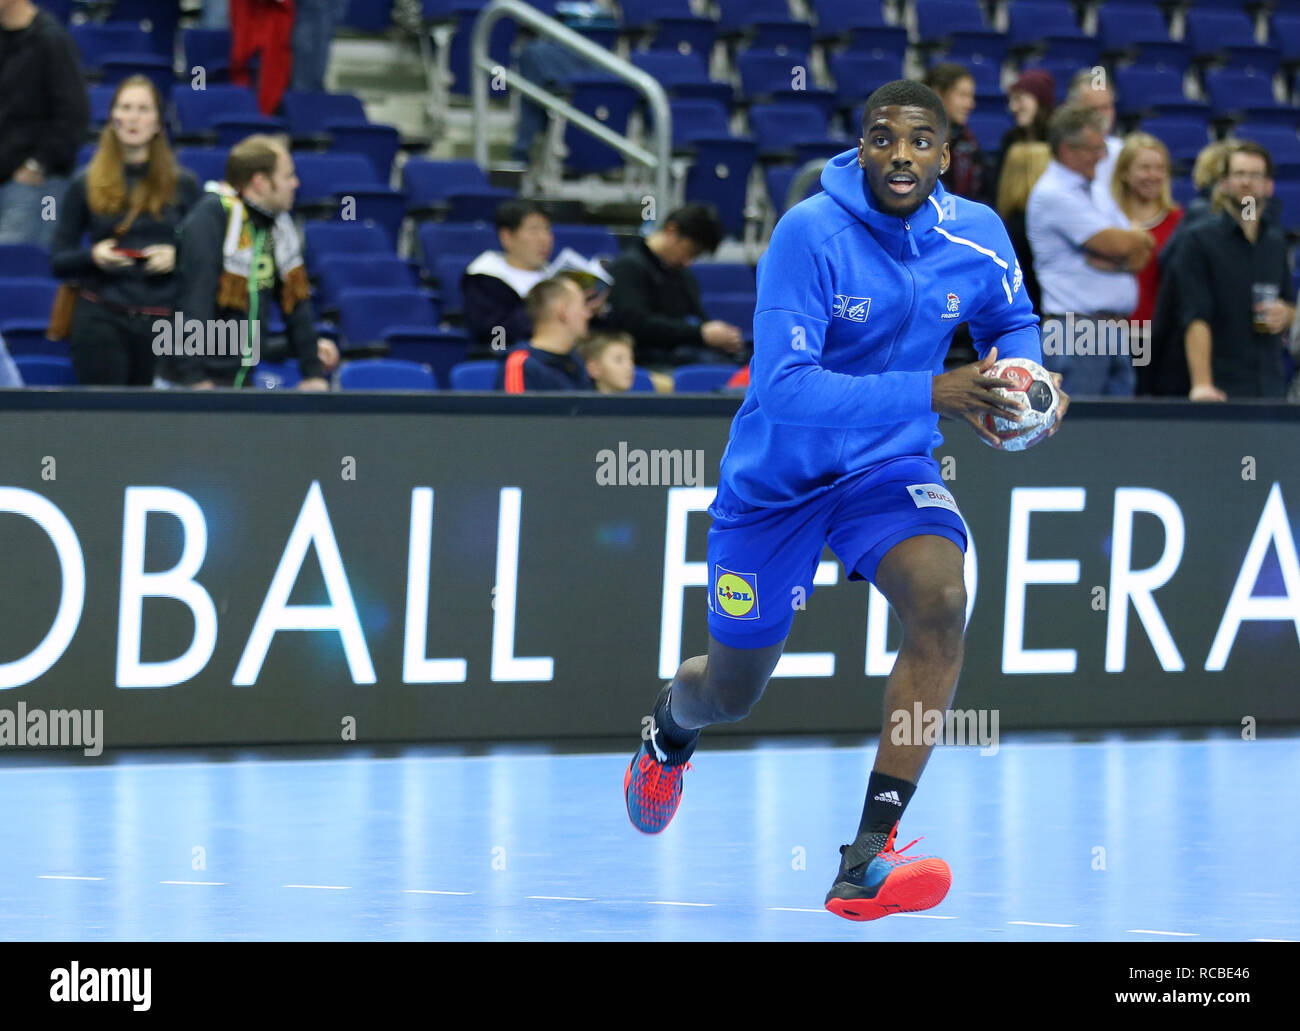 Berlin, Germany. 14th Jan, 2019. Handball IHF Men's World Championship: France centre back Dika Mem during the warm-up before the game Credit: Mickael Chavet/Alamy Live News Stock Photo